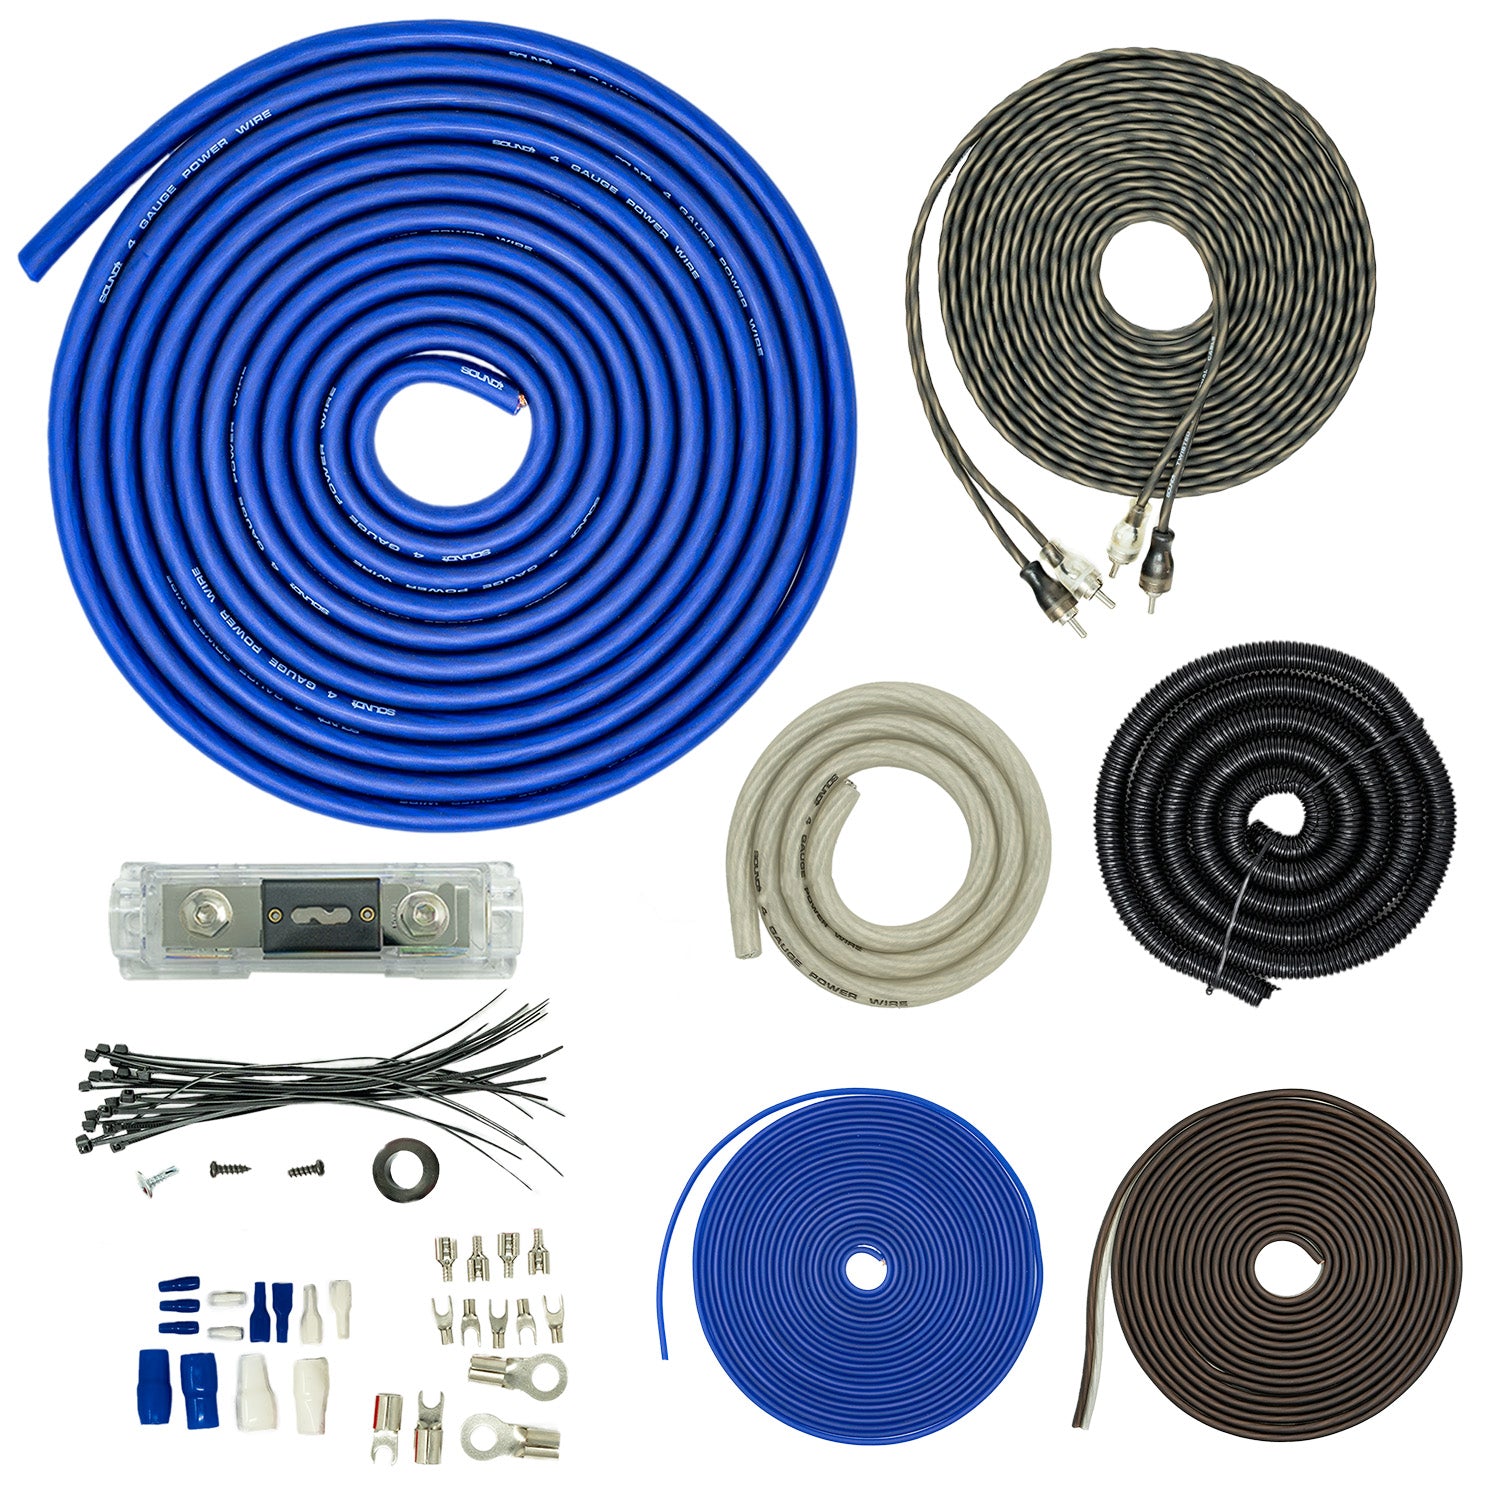 SoundBox T4AW-B, 4 Gauge Amp Kit Complete Amplifier Install Wiring Cable - 4500W